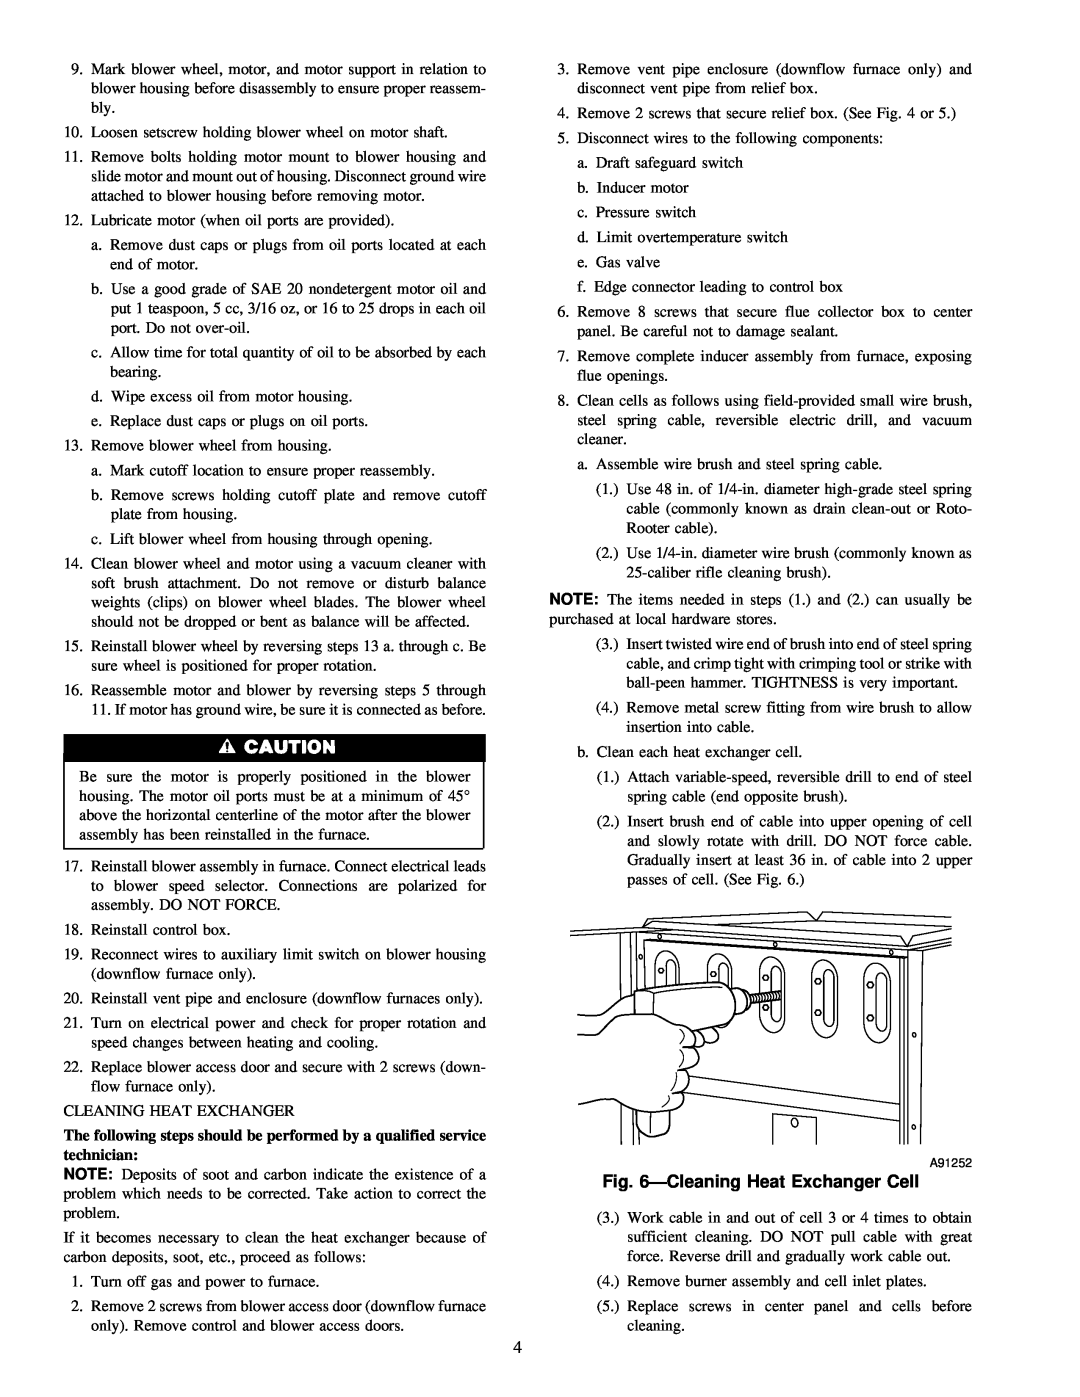 Carrier 58DFA instruction manual ÐCleaning Heat Exchanger Cell 